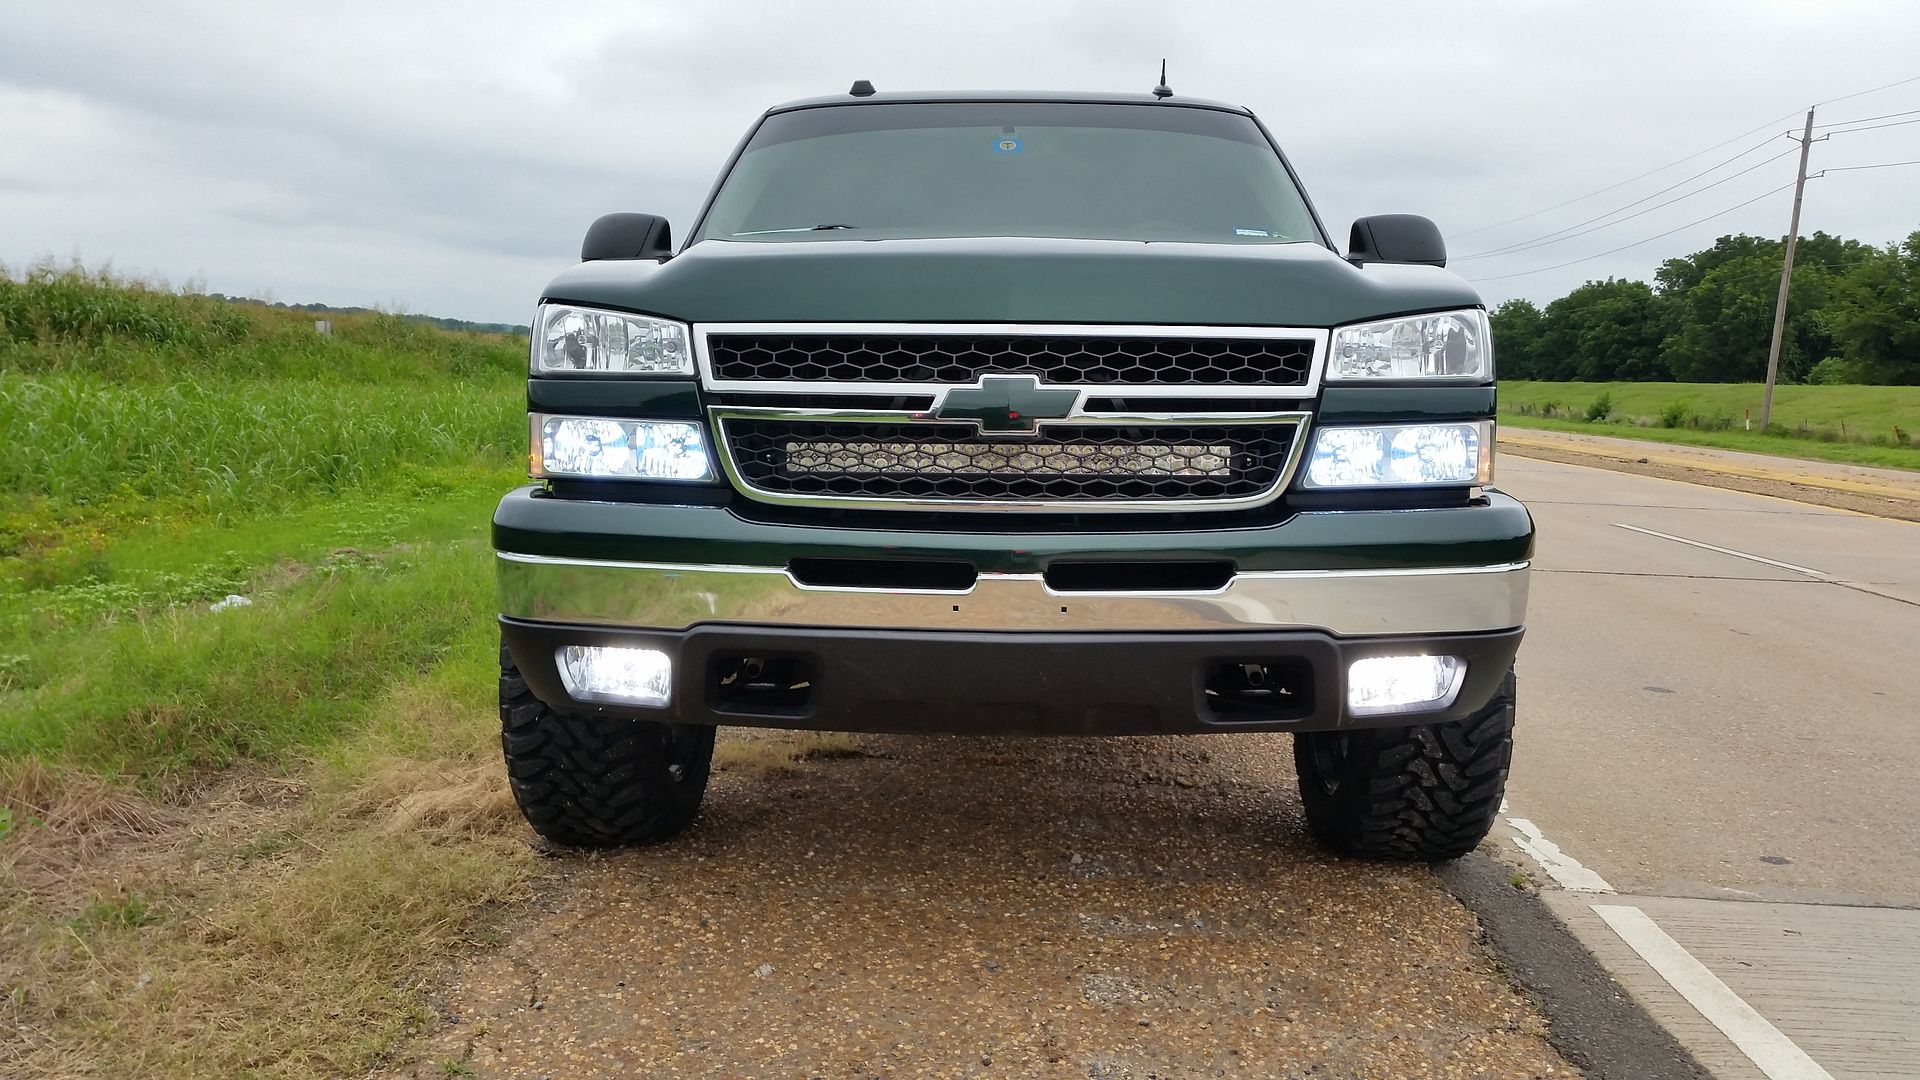 Tinted Lens LED Light Bar Behind Grill? - Chevy and GMC Duramax Diesel Forum 2008 Chevy Silverado Grill With Light Bar